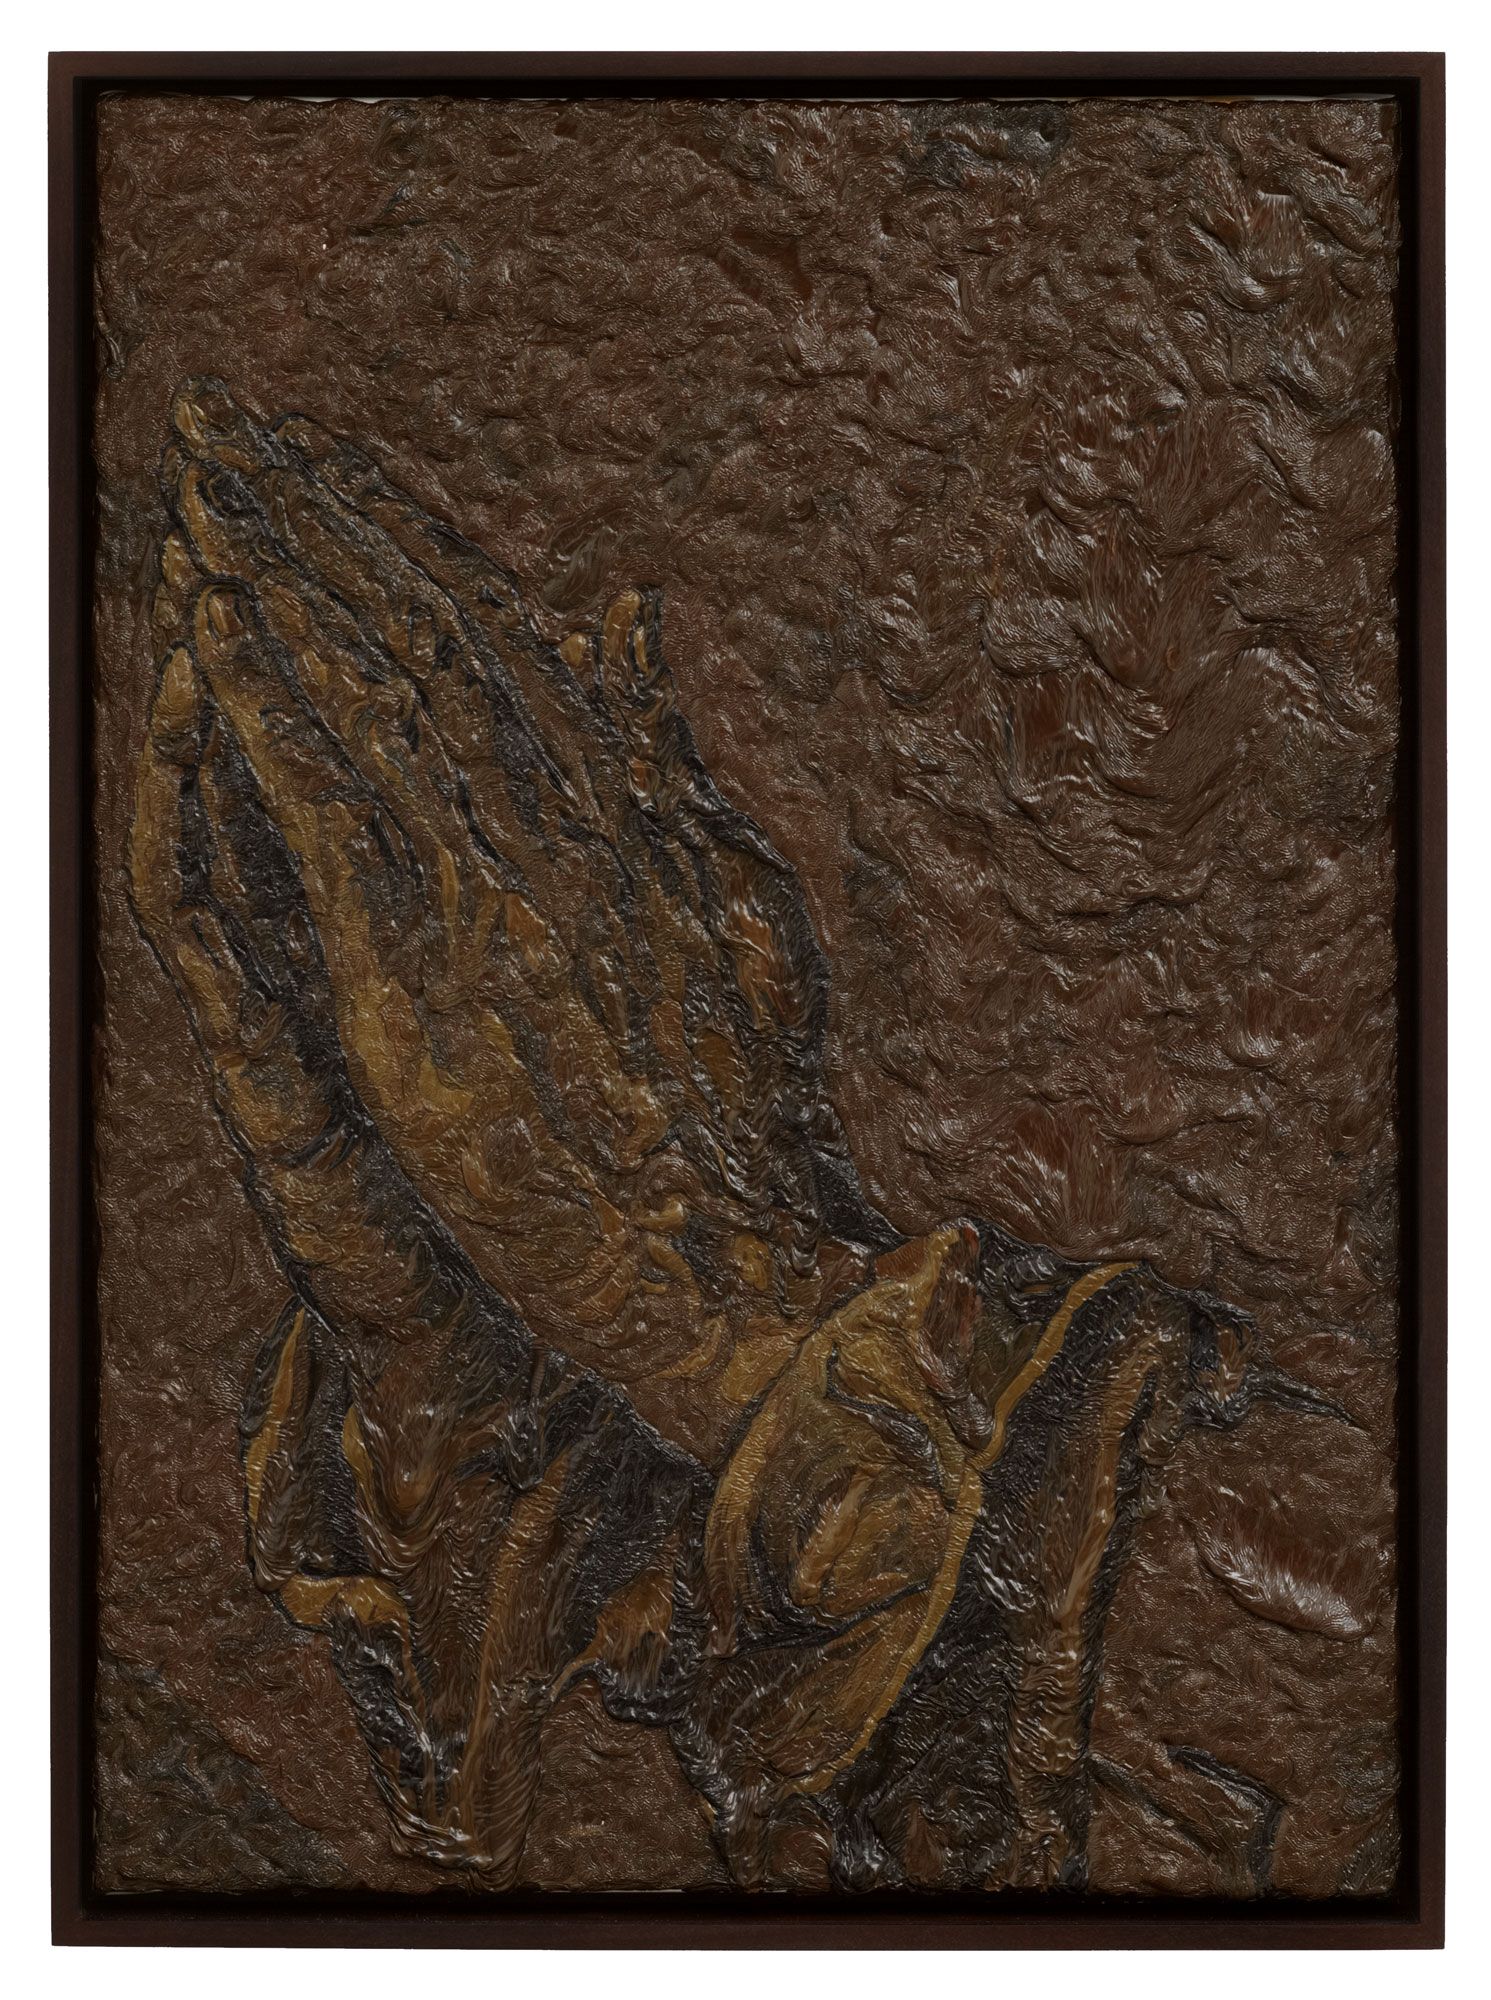 Reinvention of Albrecht Dürer's Praying Hands in thick brown and yellow oil paints.